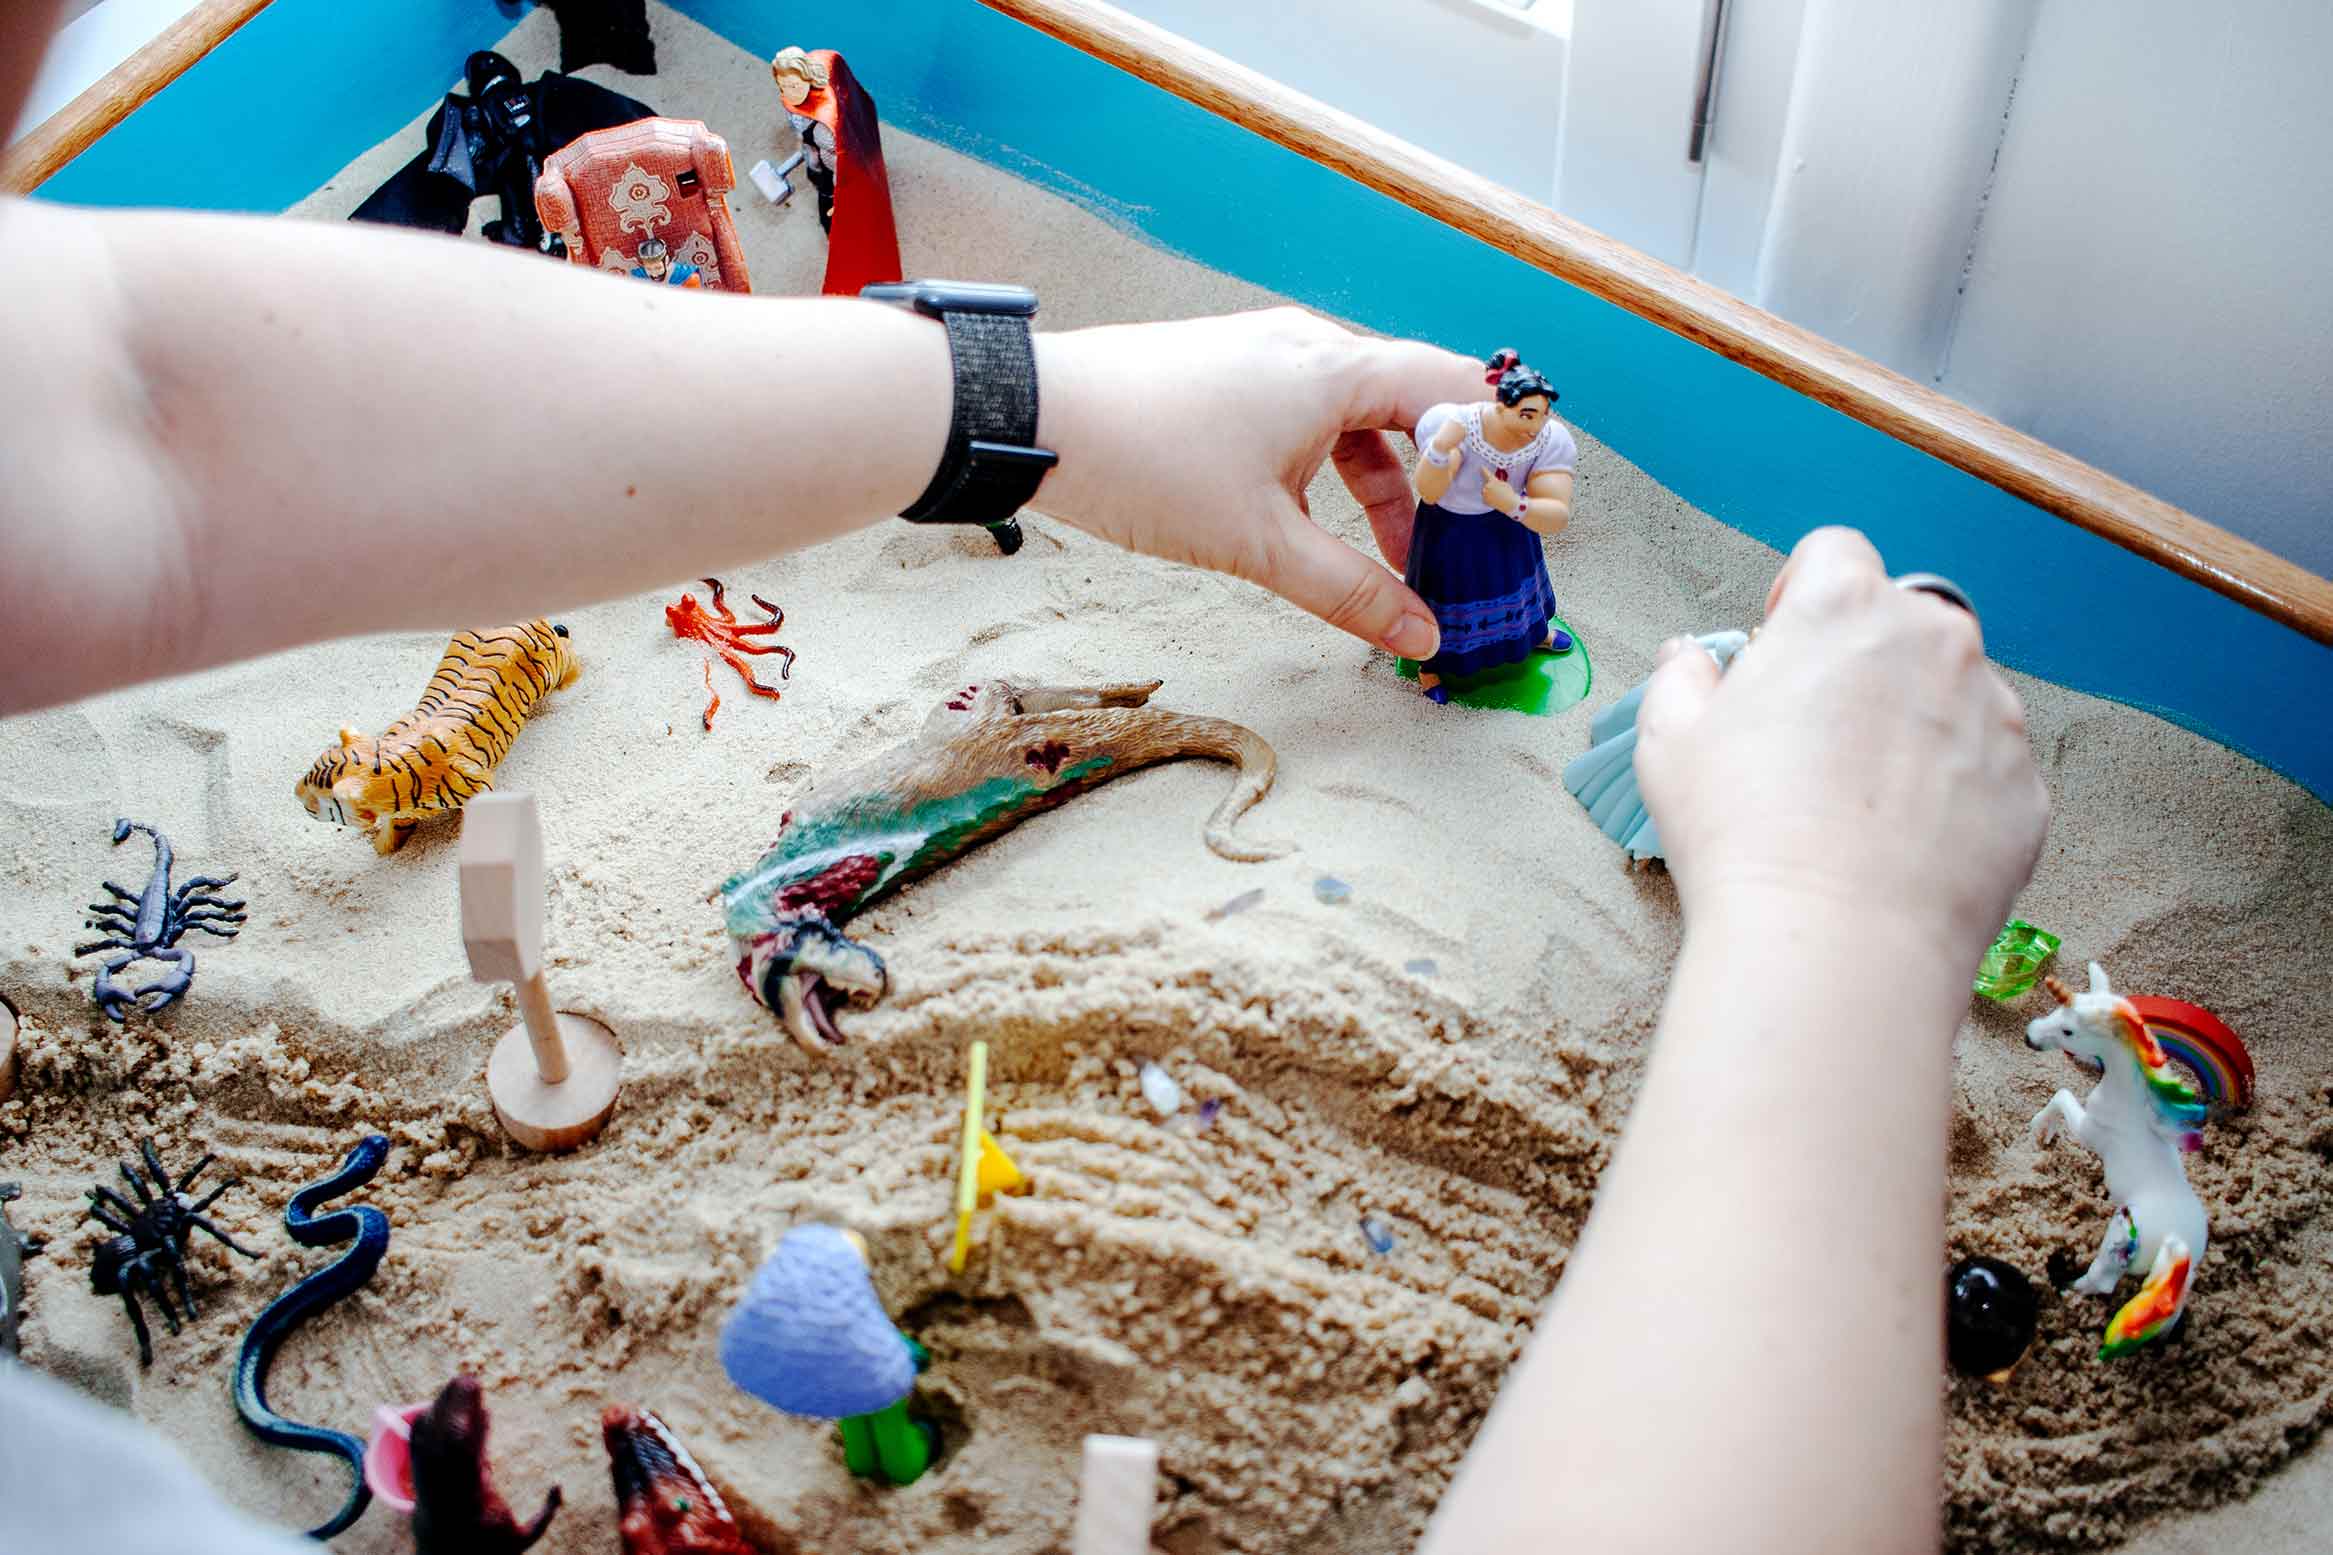 Hands in sand pit playing with toys